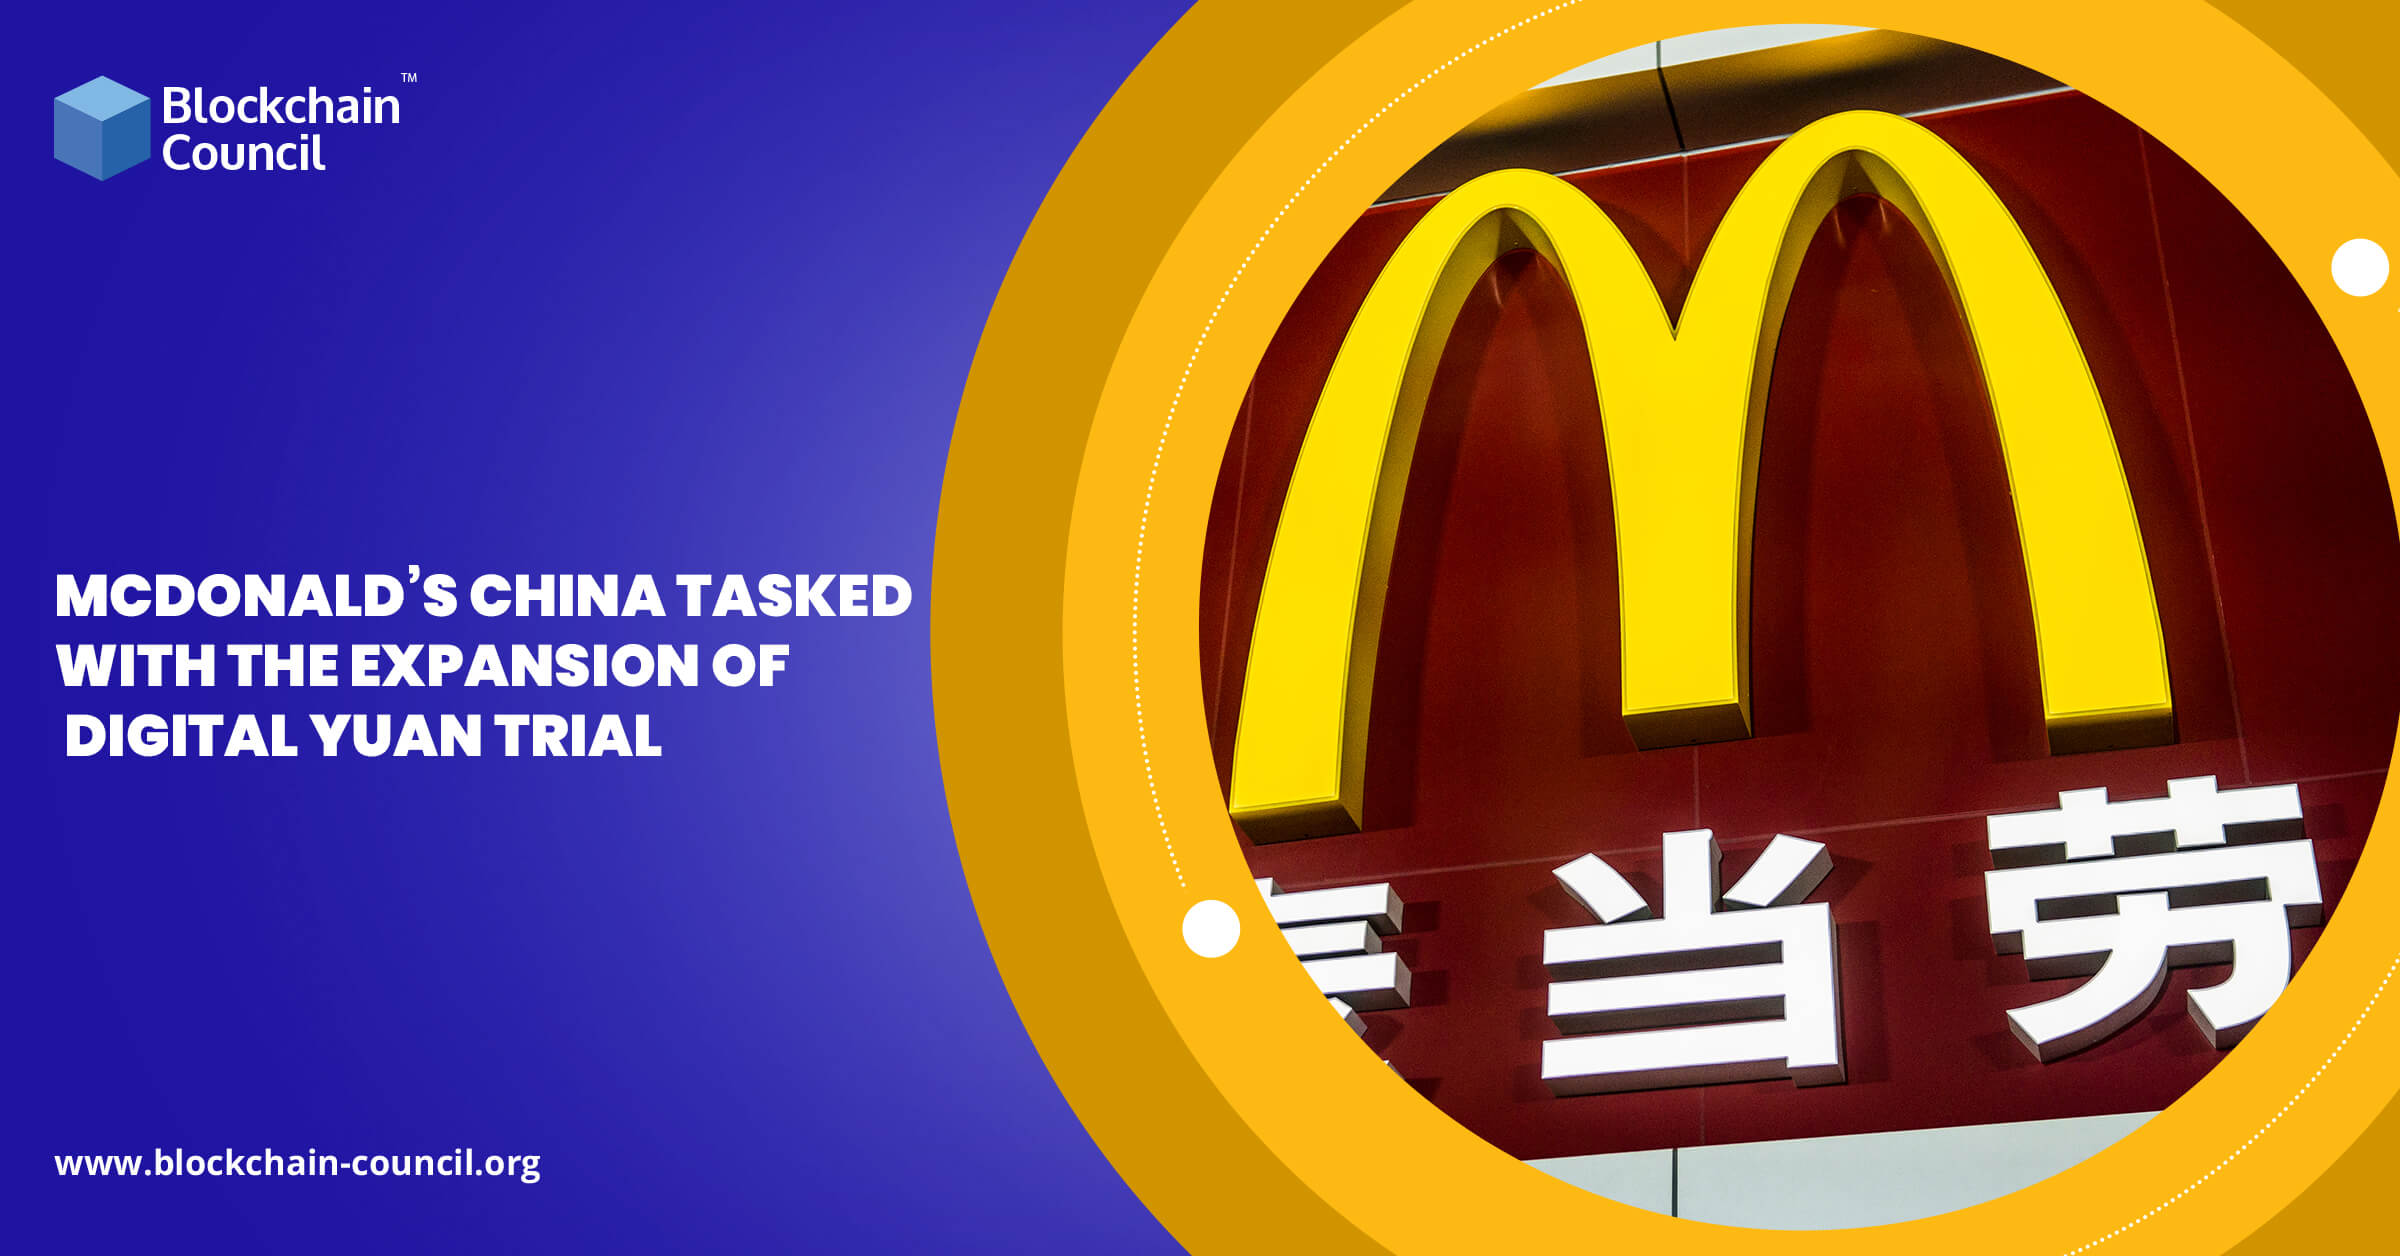 McDonald’s China Tasked With The Expansion Of Digital Yuan Trial